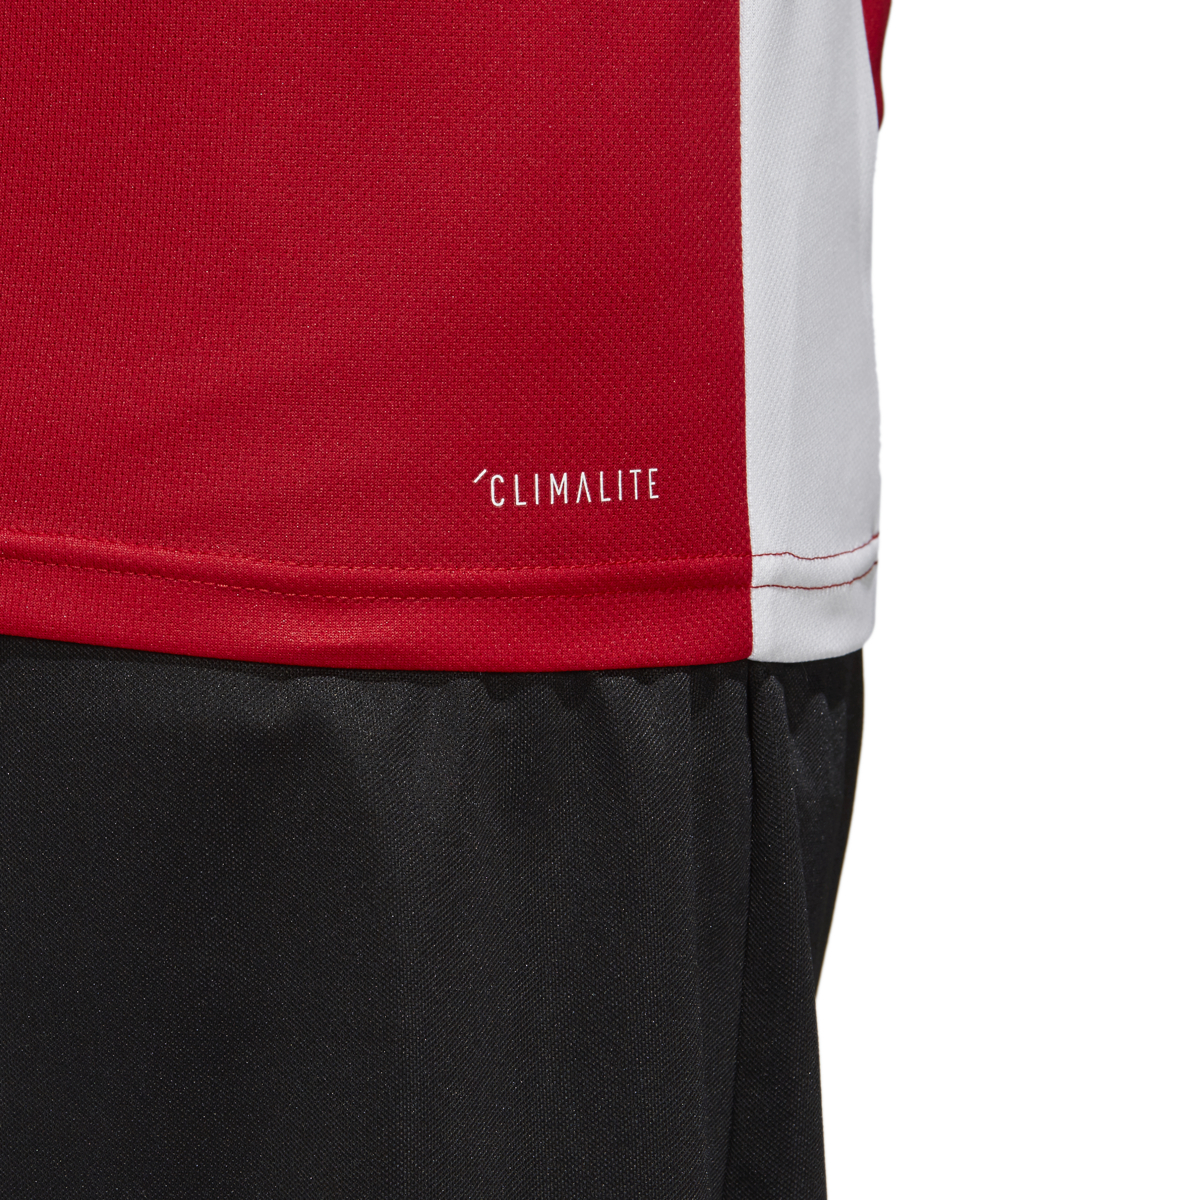 Men's Adidas Entrada 18 Soccer Jersey Red/White - XL - image 5 of 6